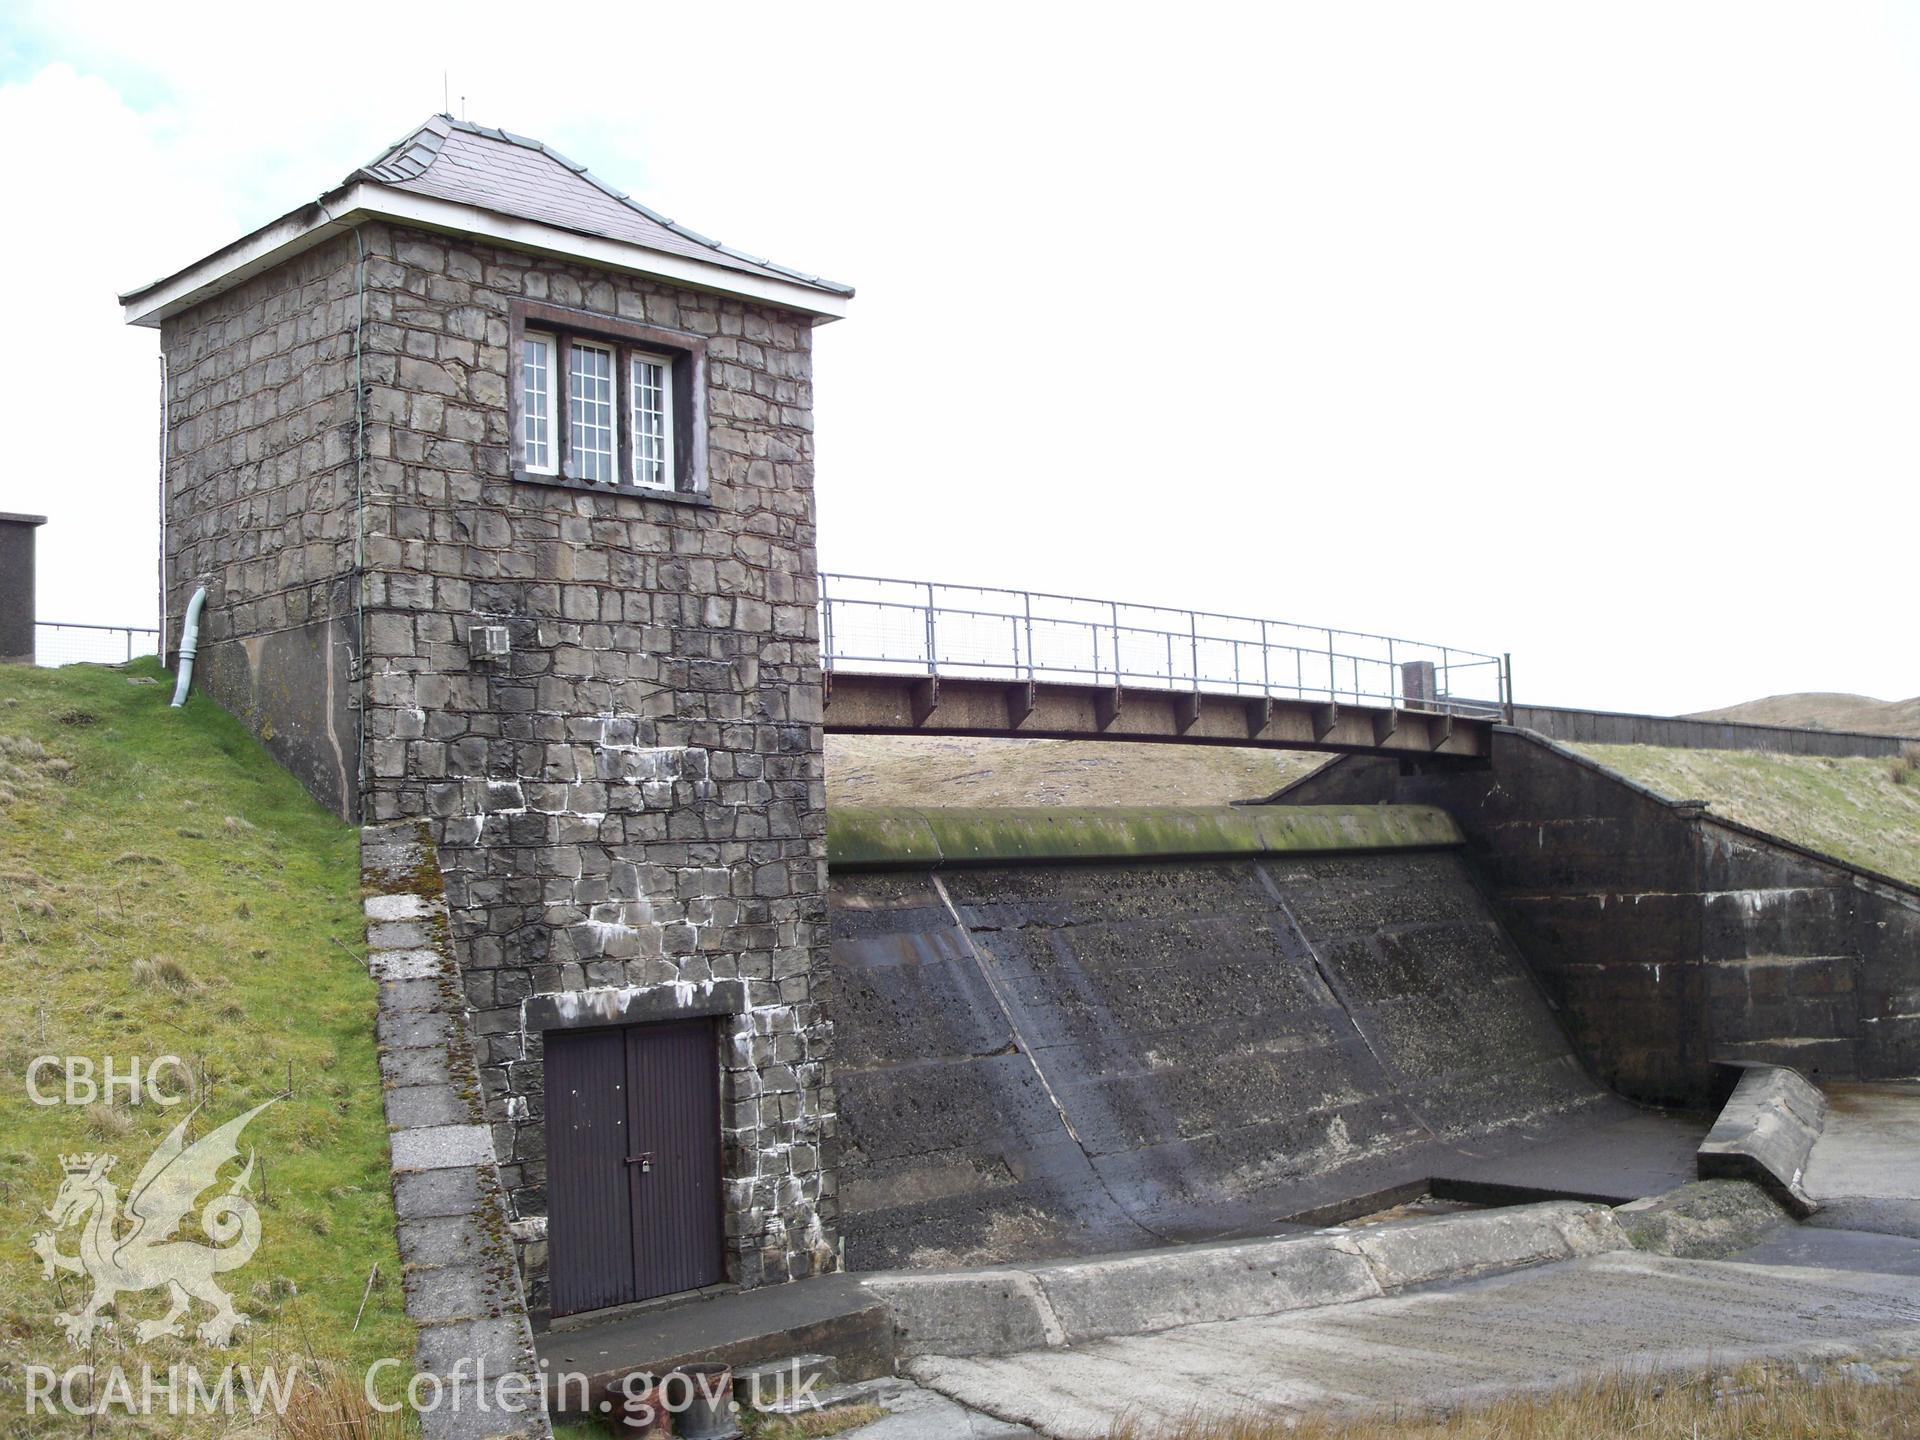 Detail of dam, outlet channel and regulation tower/valve house; taken from the south-west.